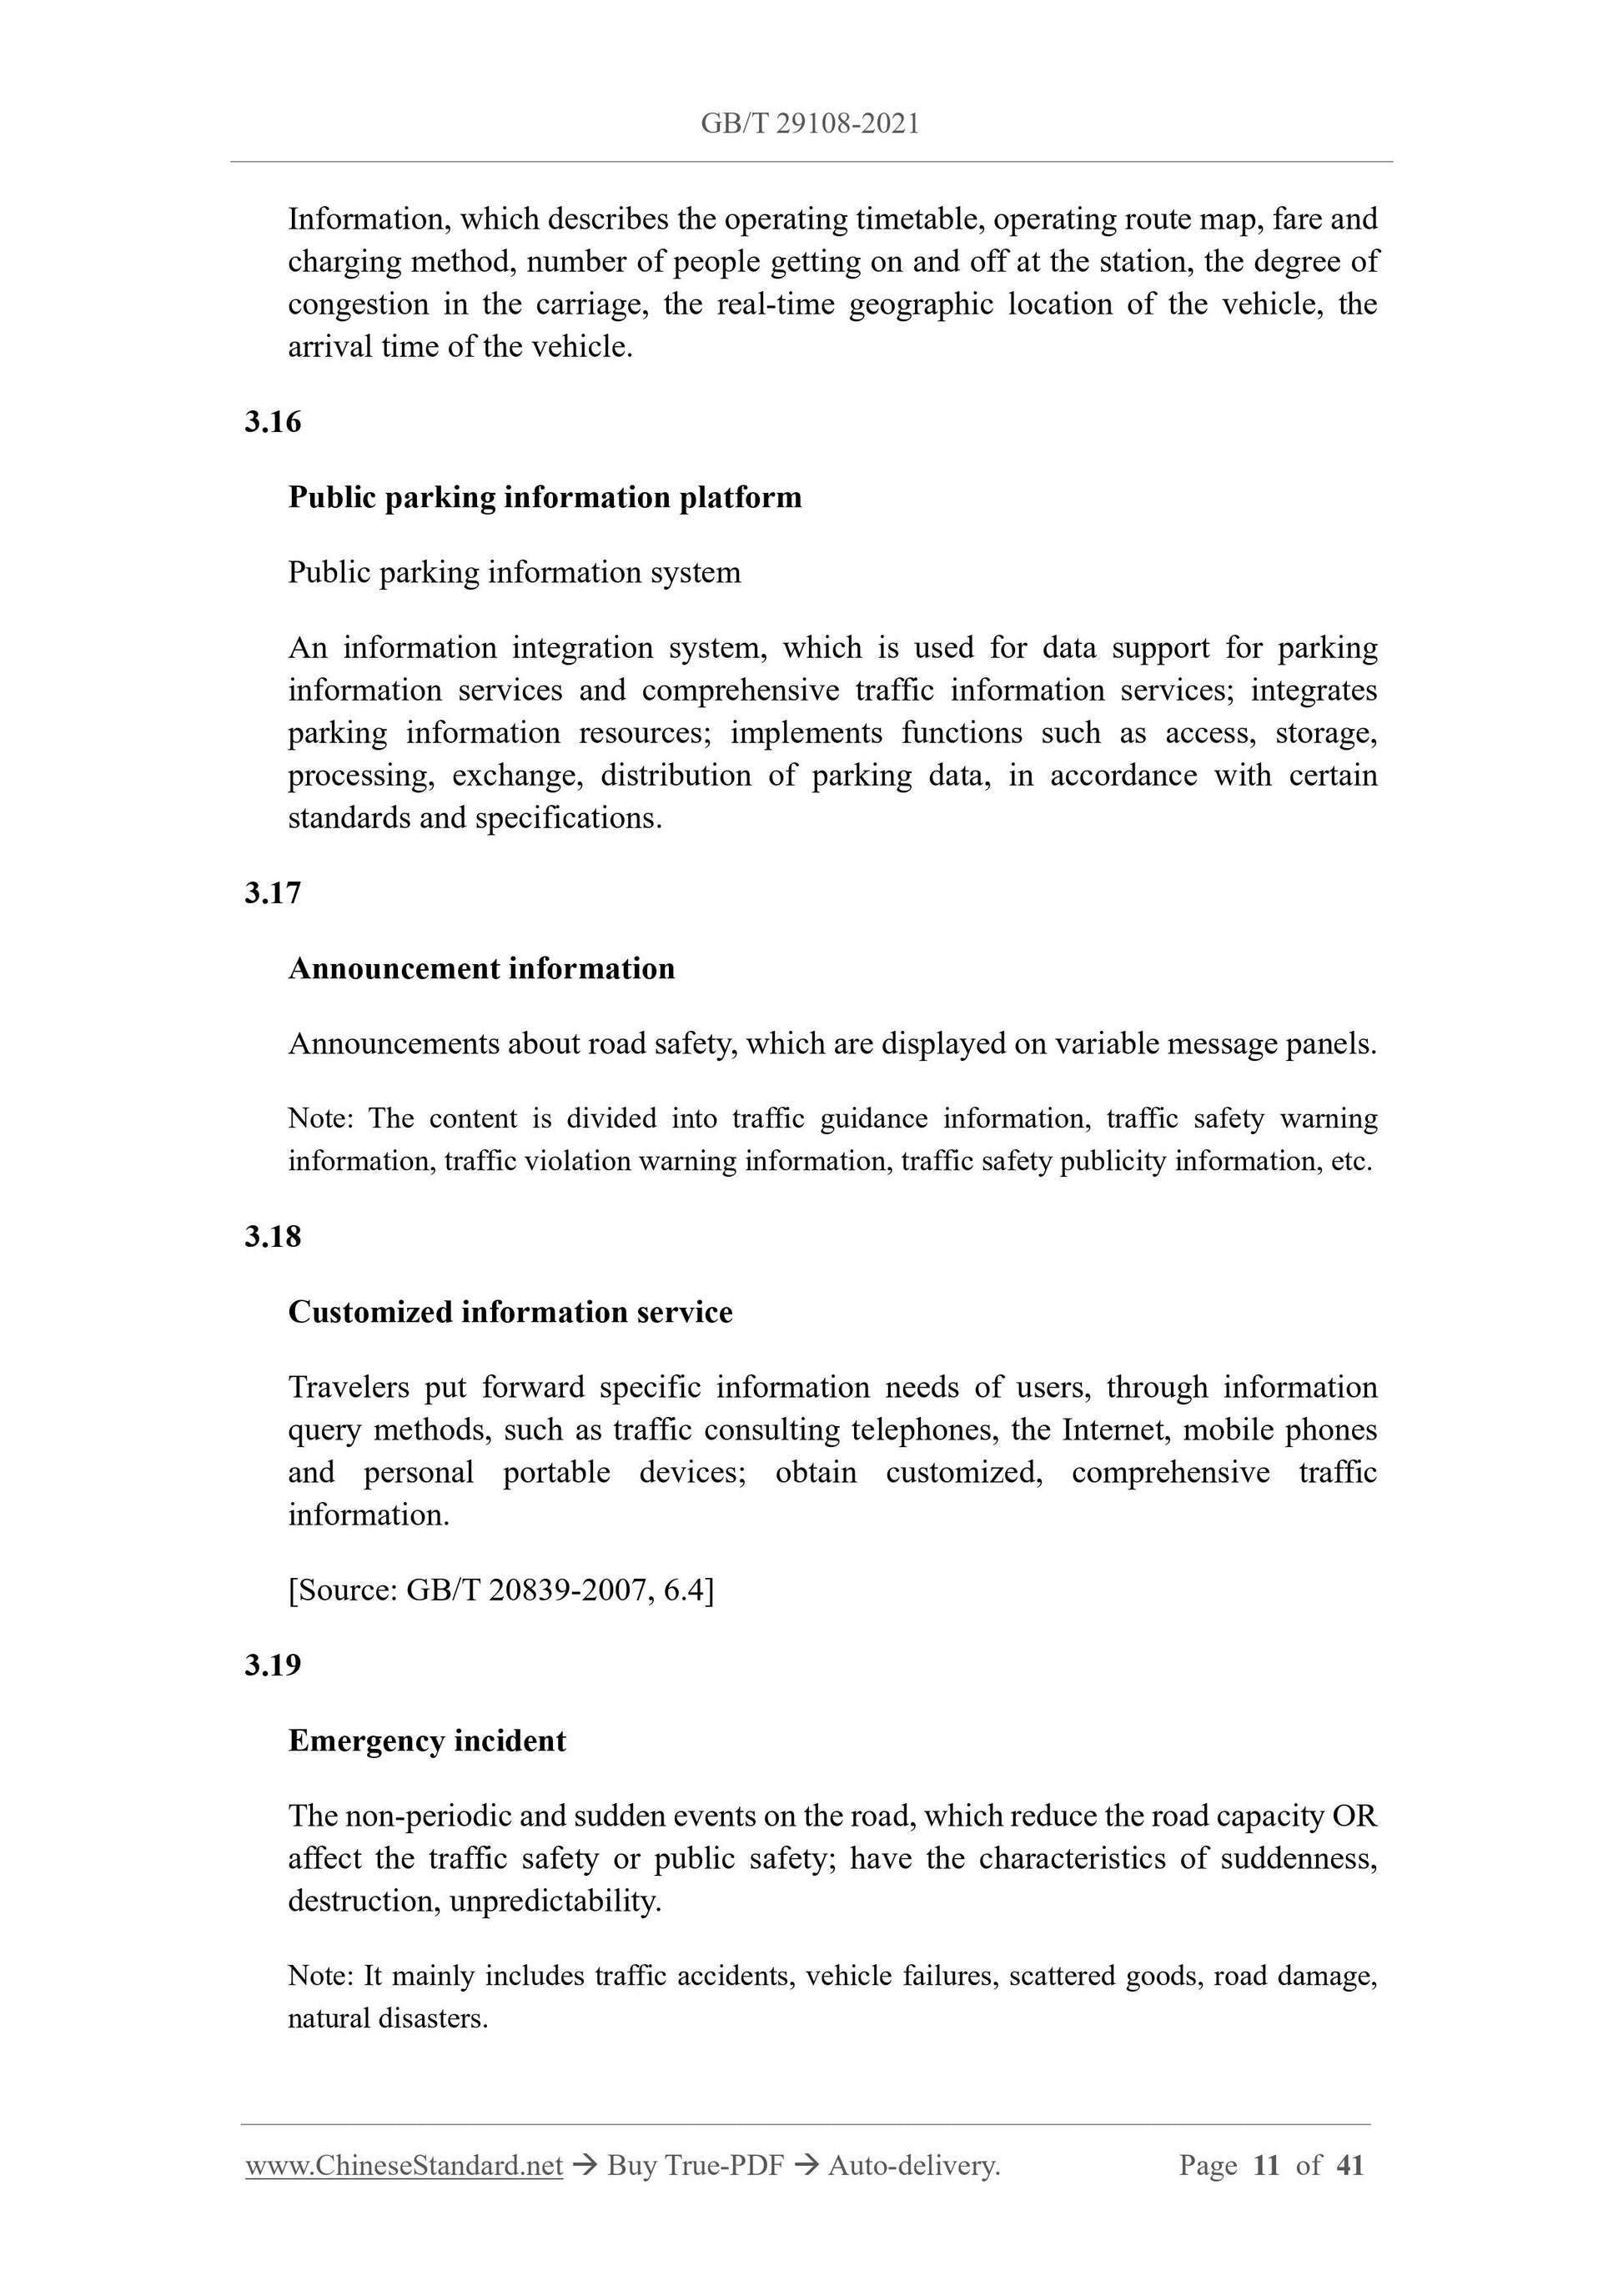 GB/T 29108-2021 Page 5